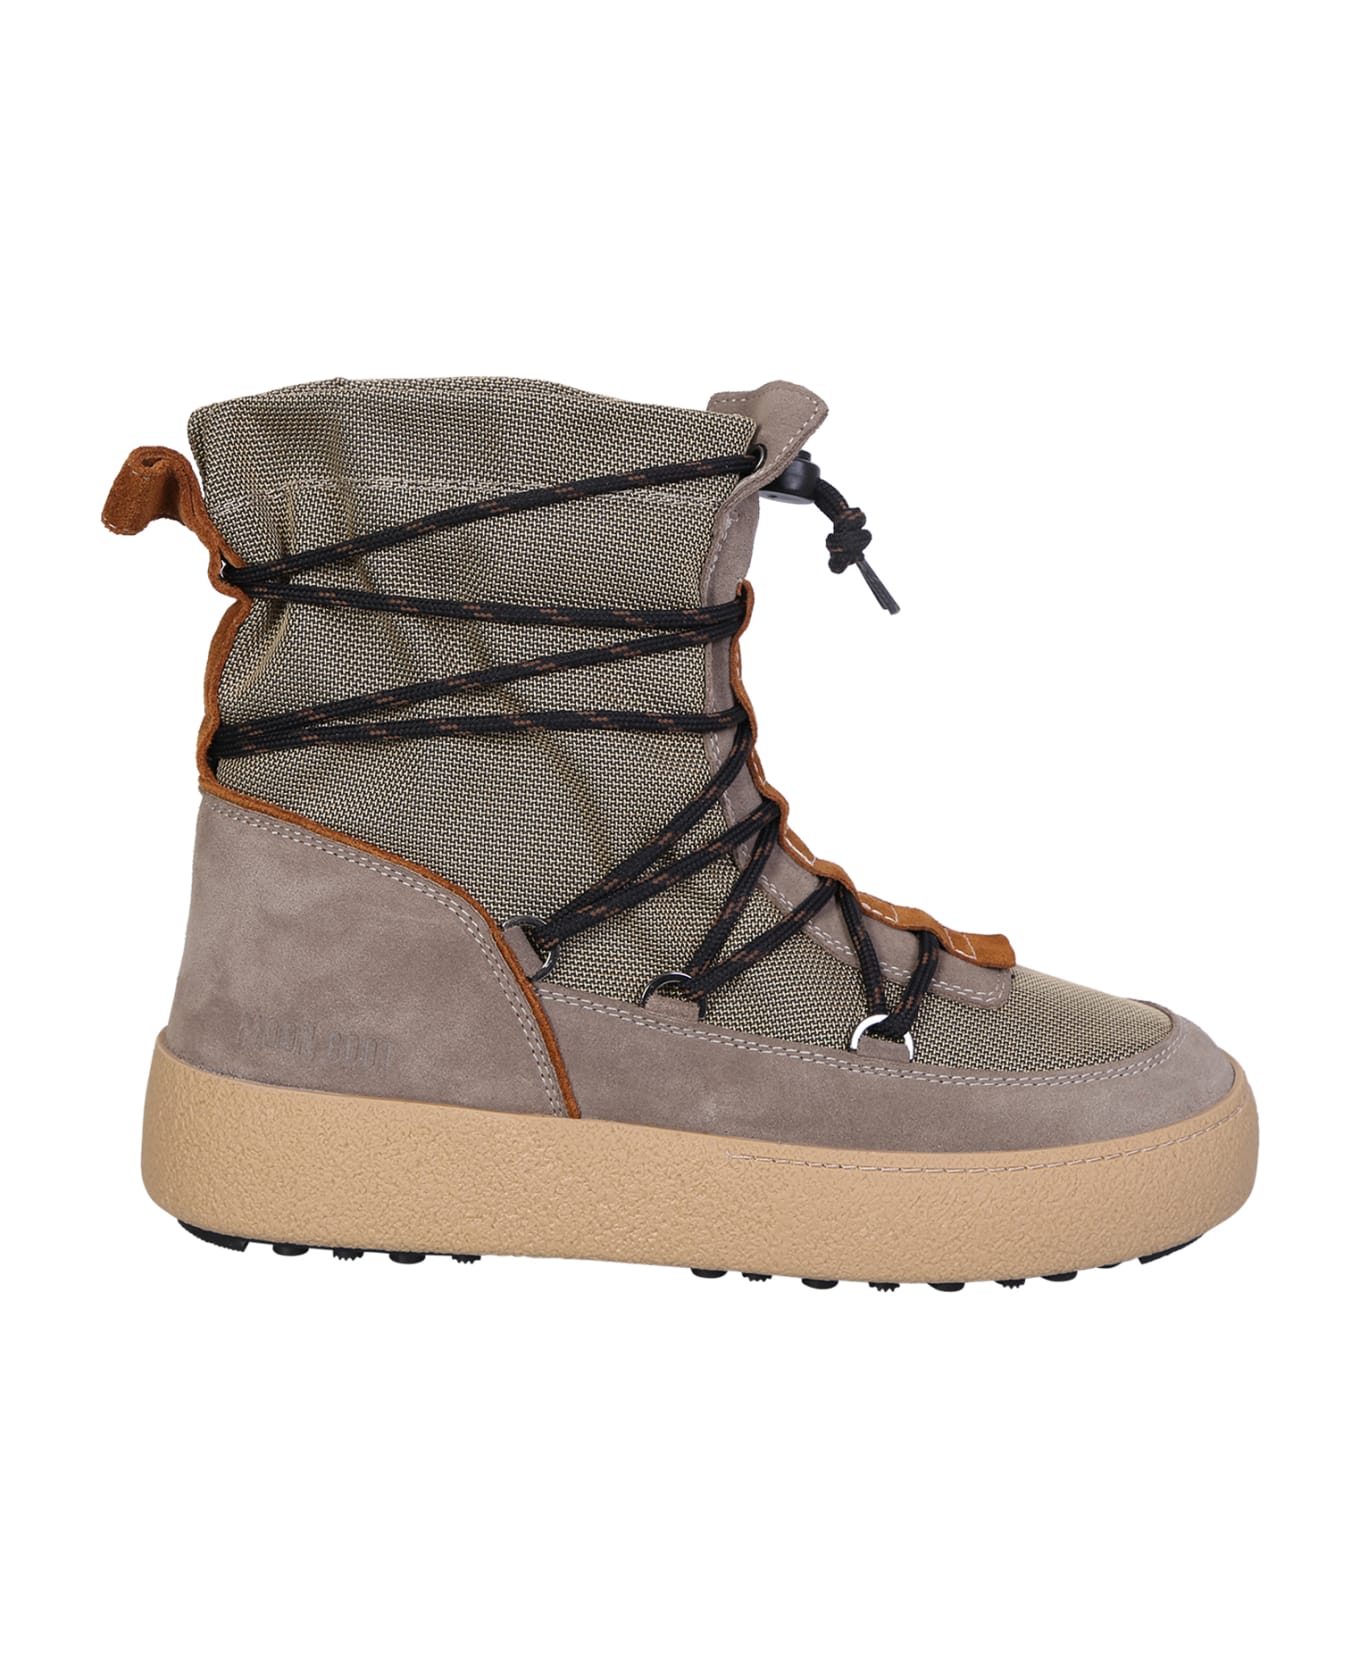 Moon Boot Mtrack Citizen Ankle Boots - Beige ブーツ